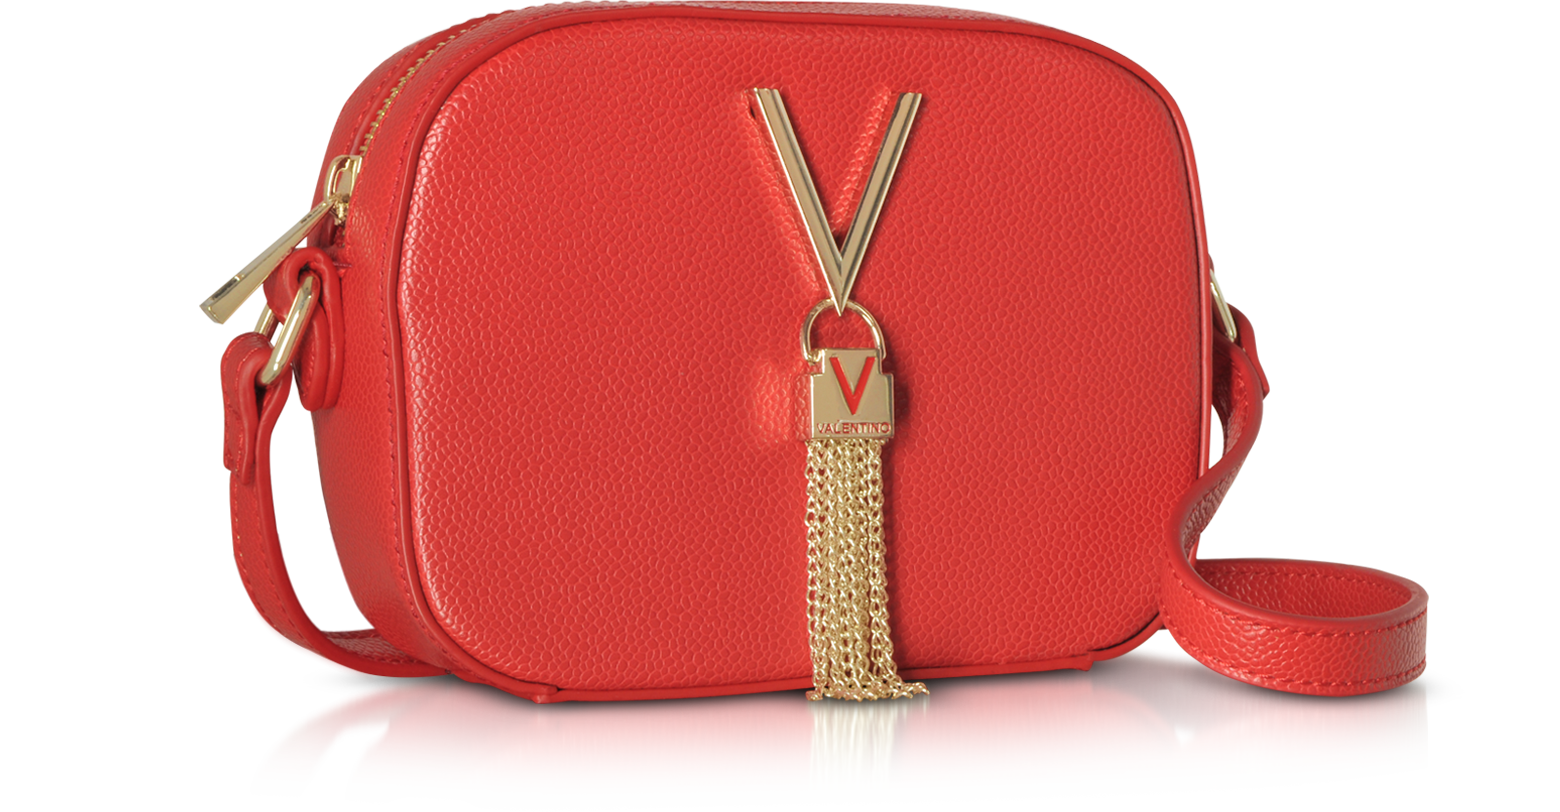 Valentino by Mario Valentino Red Lizard Embossed Eco Leather Divina Mini  Crossbody Bag at FORZIERI